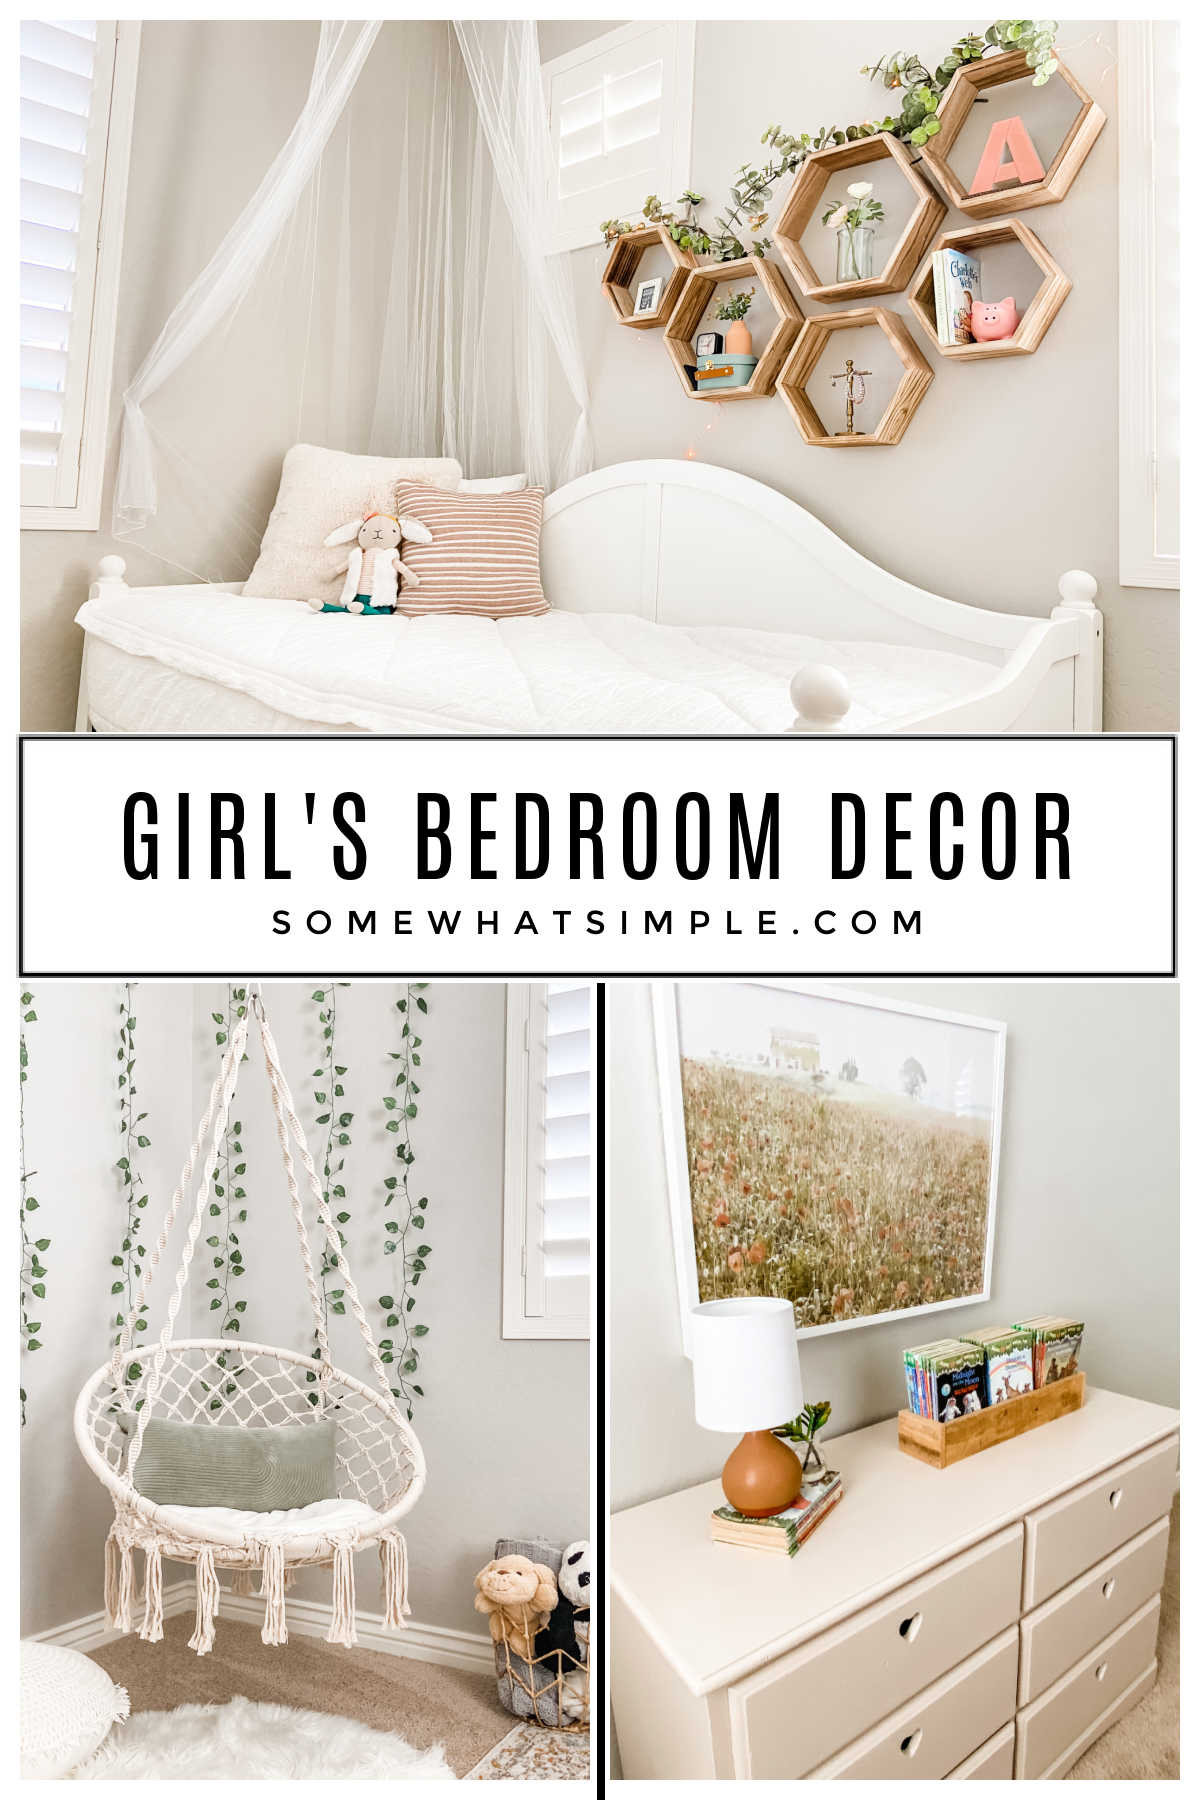 Designing And Decorating A Cheap Room On Budget